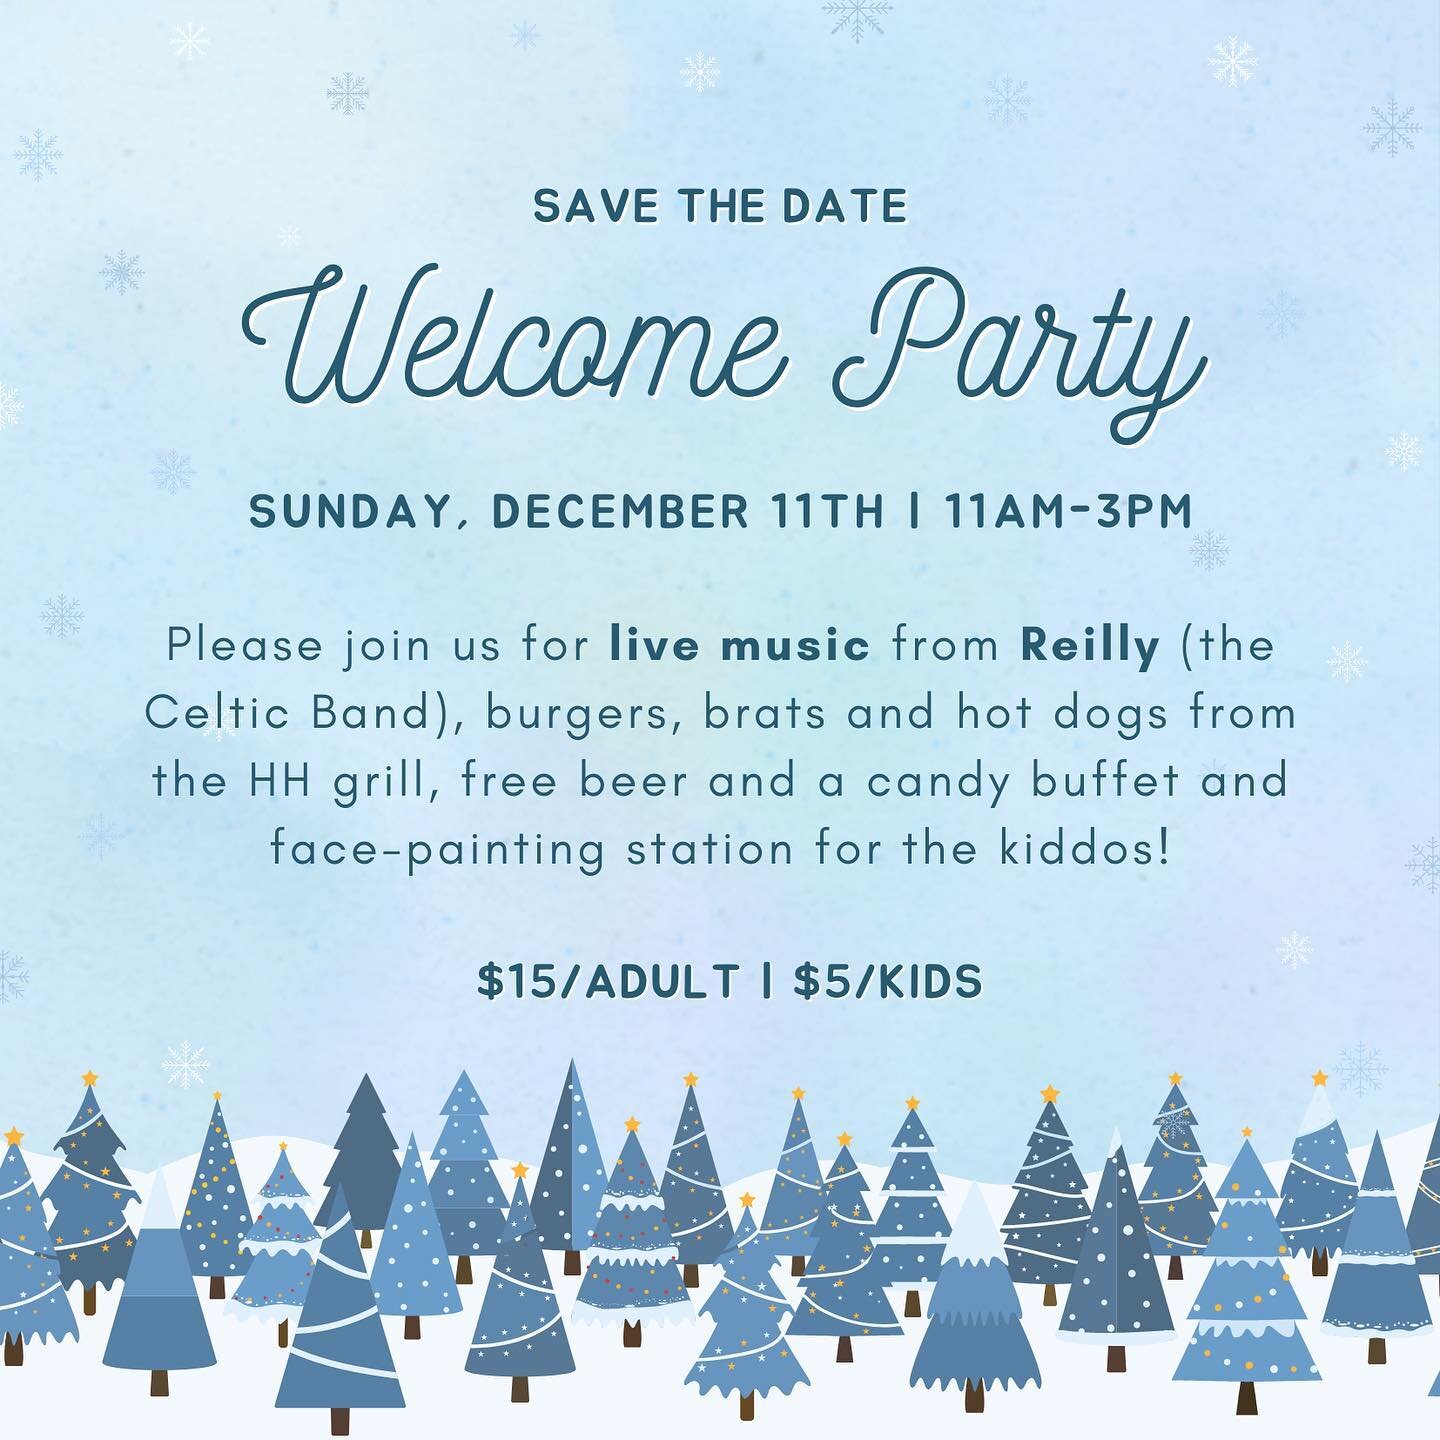 Mark you calendars 📆 for Sunday, December 11th and join us for our Annual Welcome Party 🥂❄️!
 ⠀⠀⠀⠀⠀⠀
🔸11am-3pm
🔸Burgers/brats/hot dogs and FREE beer 🍻
🔸Live music from the Celtic band Reilly 🎶, a holiday candy buffet + face painting station fo